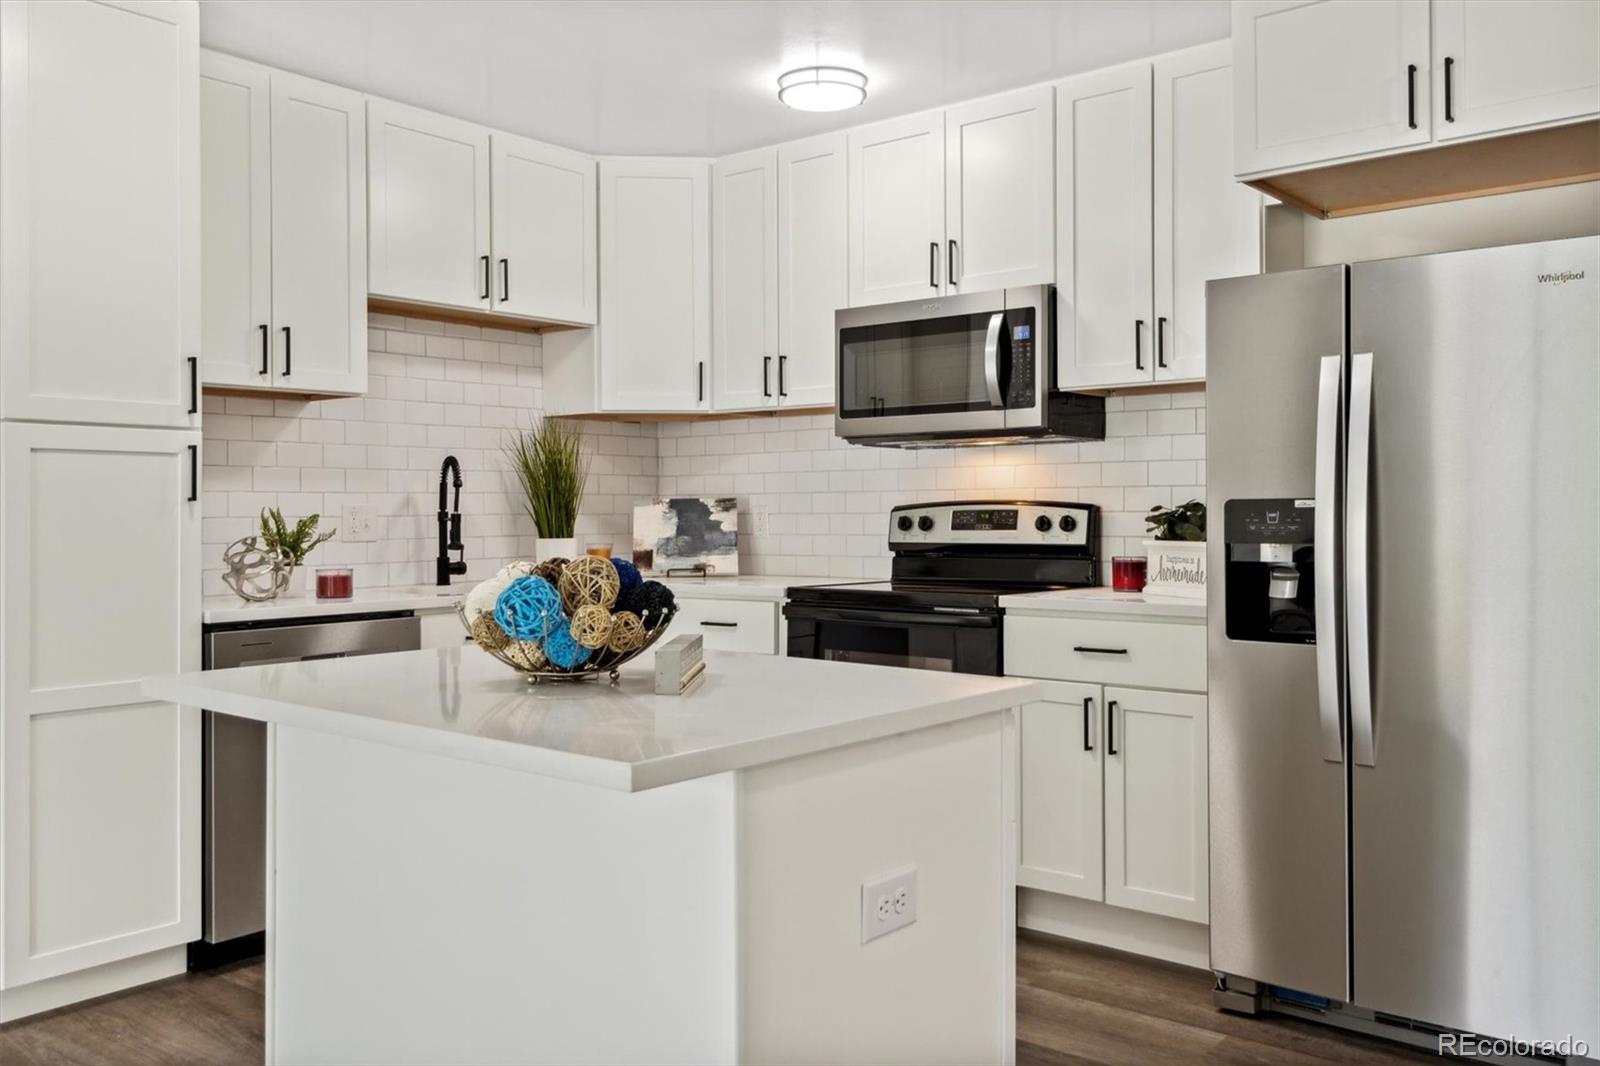 a kitchen with stainless steel appliances a white refrigerator a stove a microwave and sink